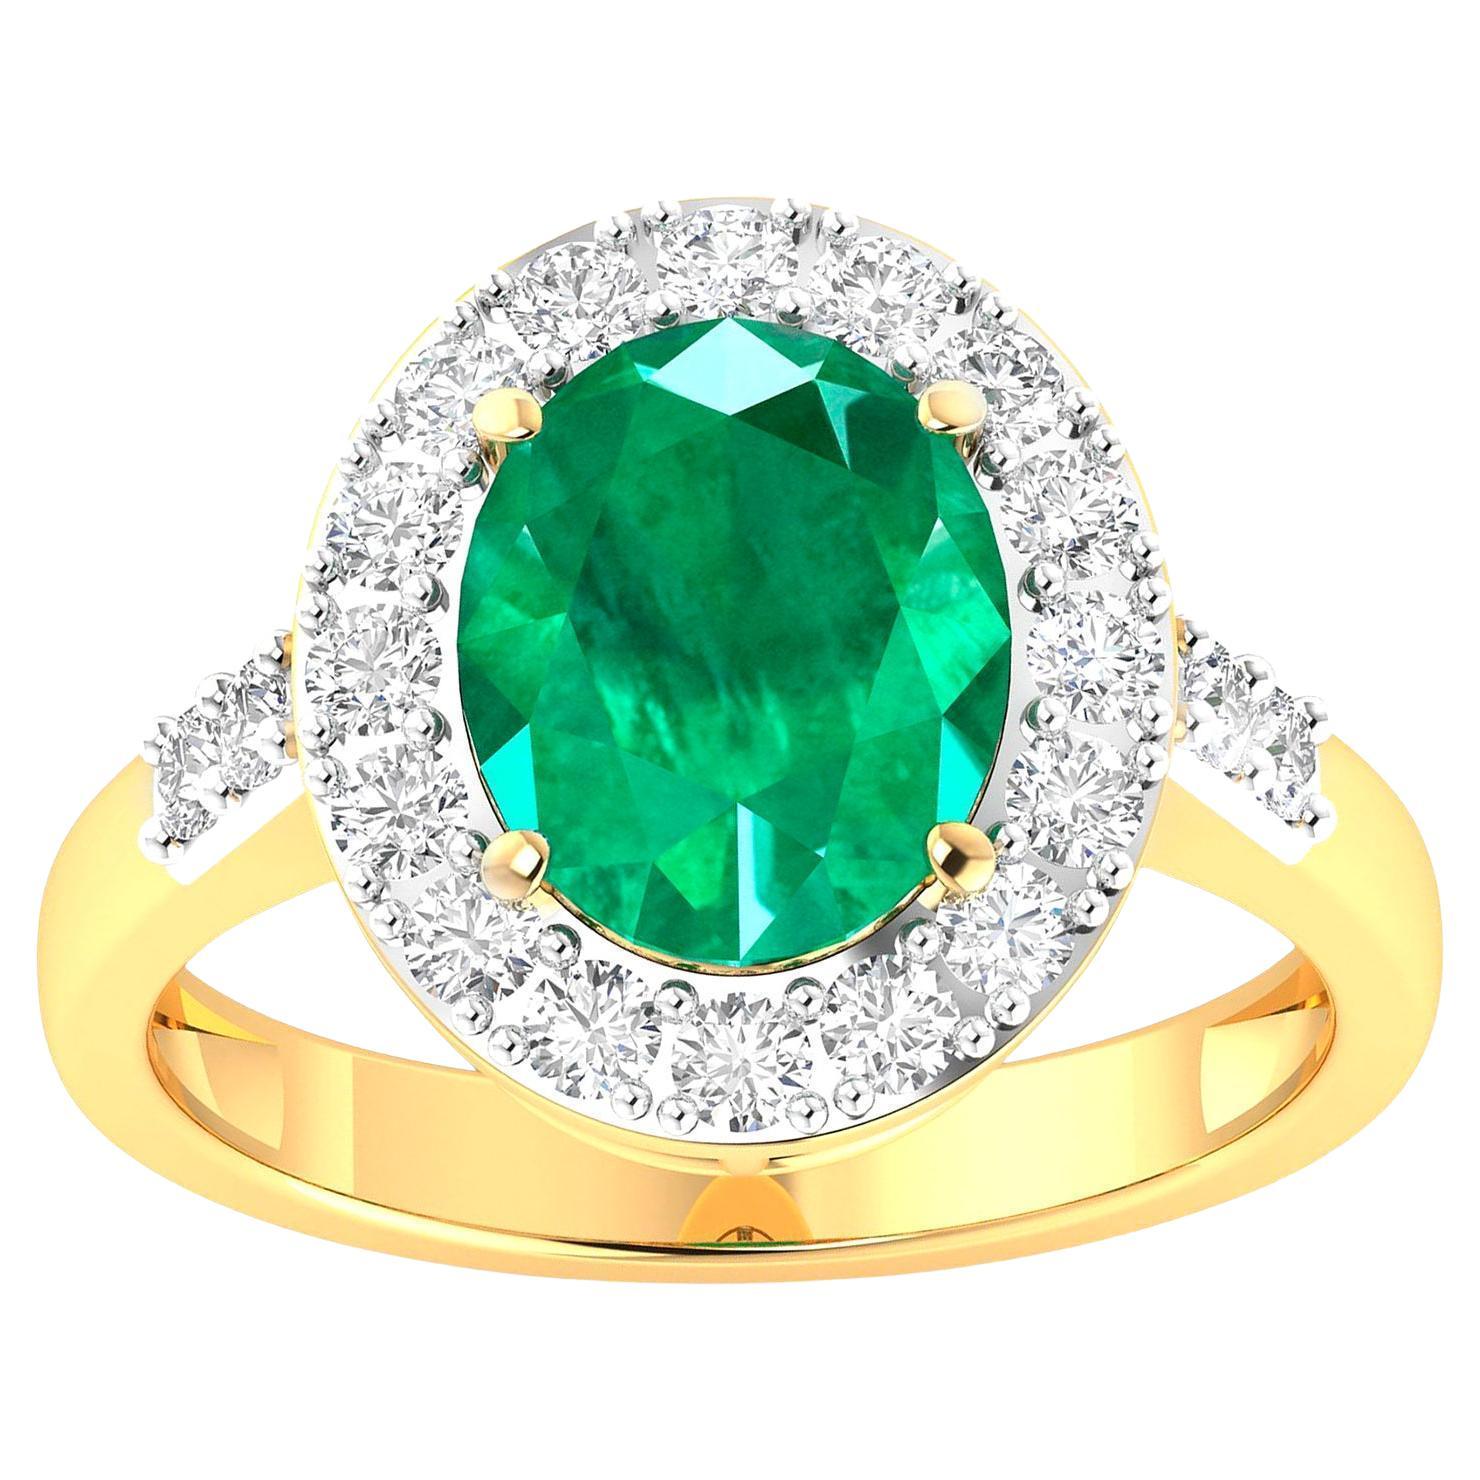 Zambian Emerald Ring With Diamonds 3.04 Carats 14K Yellow Gold For Sale